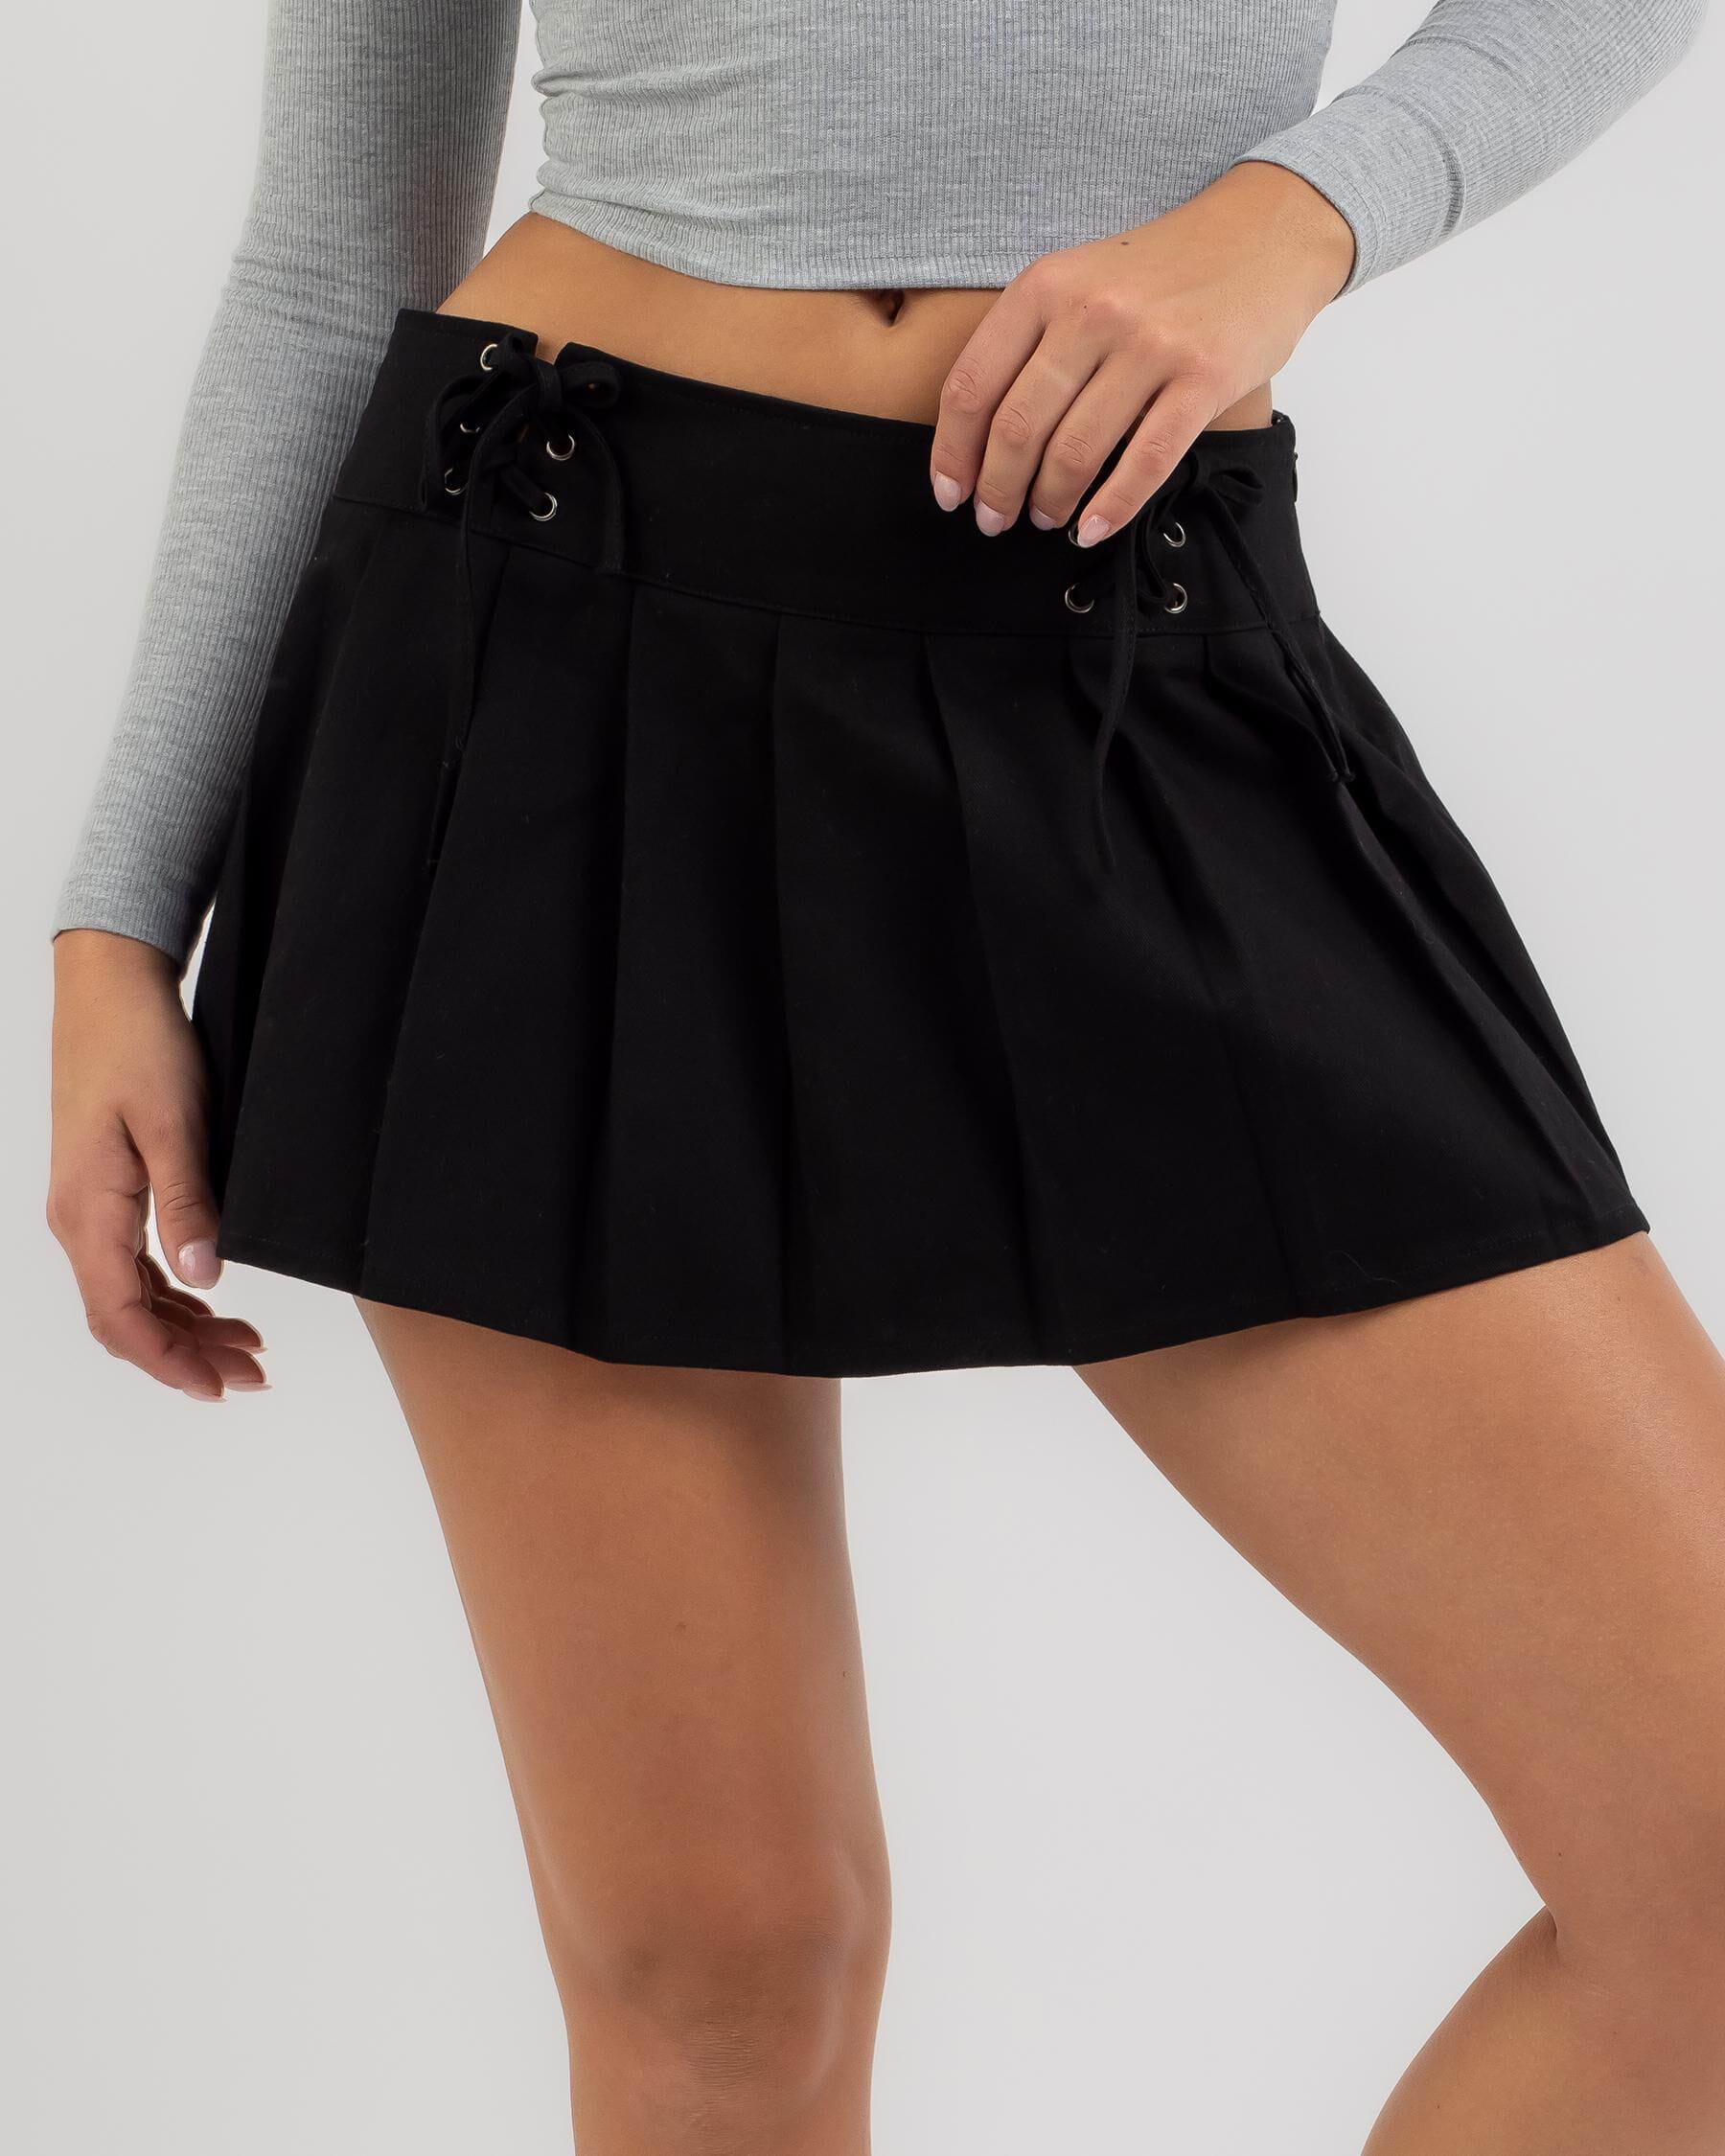 Shop Womens Pleated Skirts Online - FREE* Shipping and Easy Returns